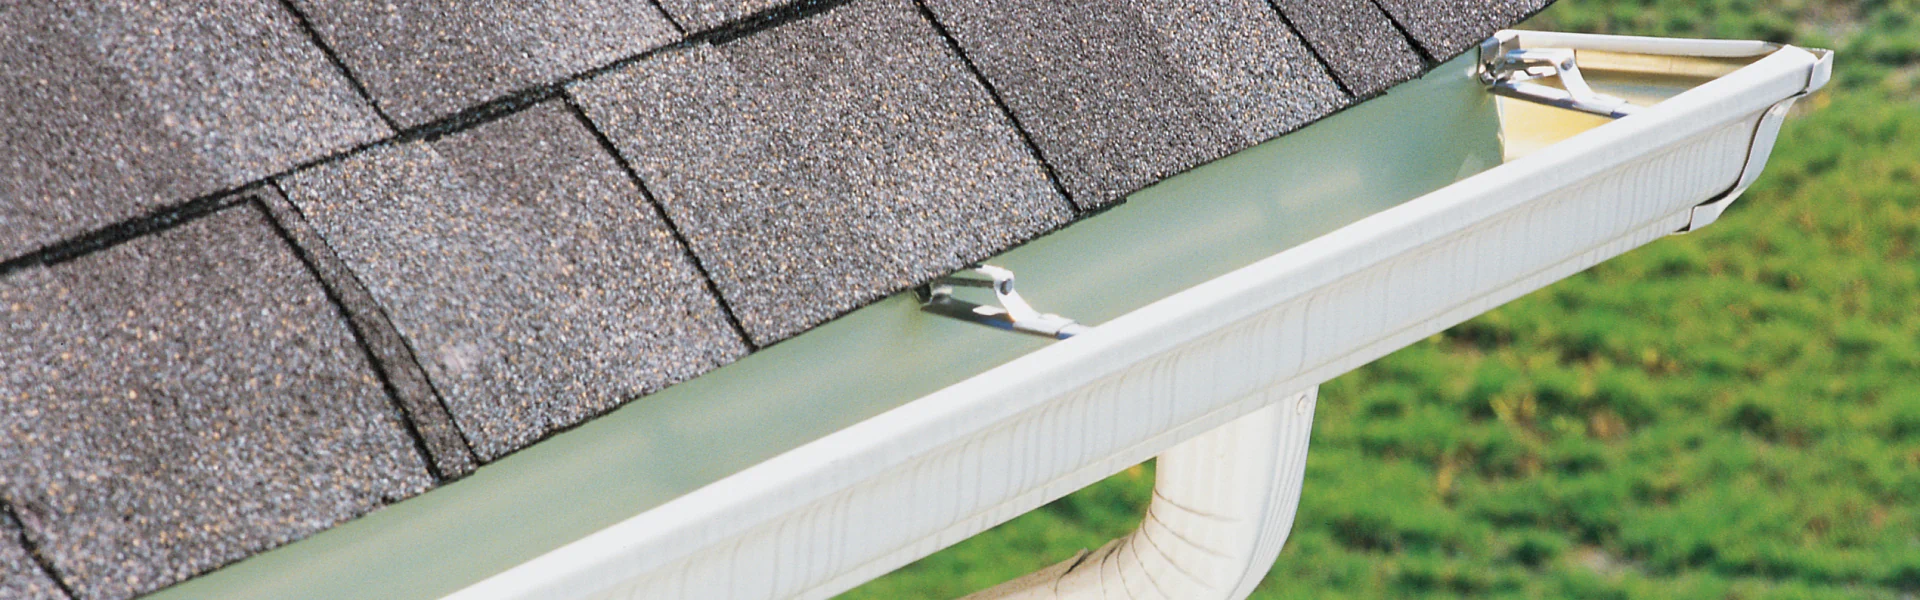 hero roof gutter cleaning service tucson az